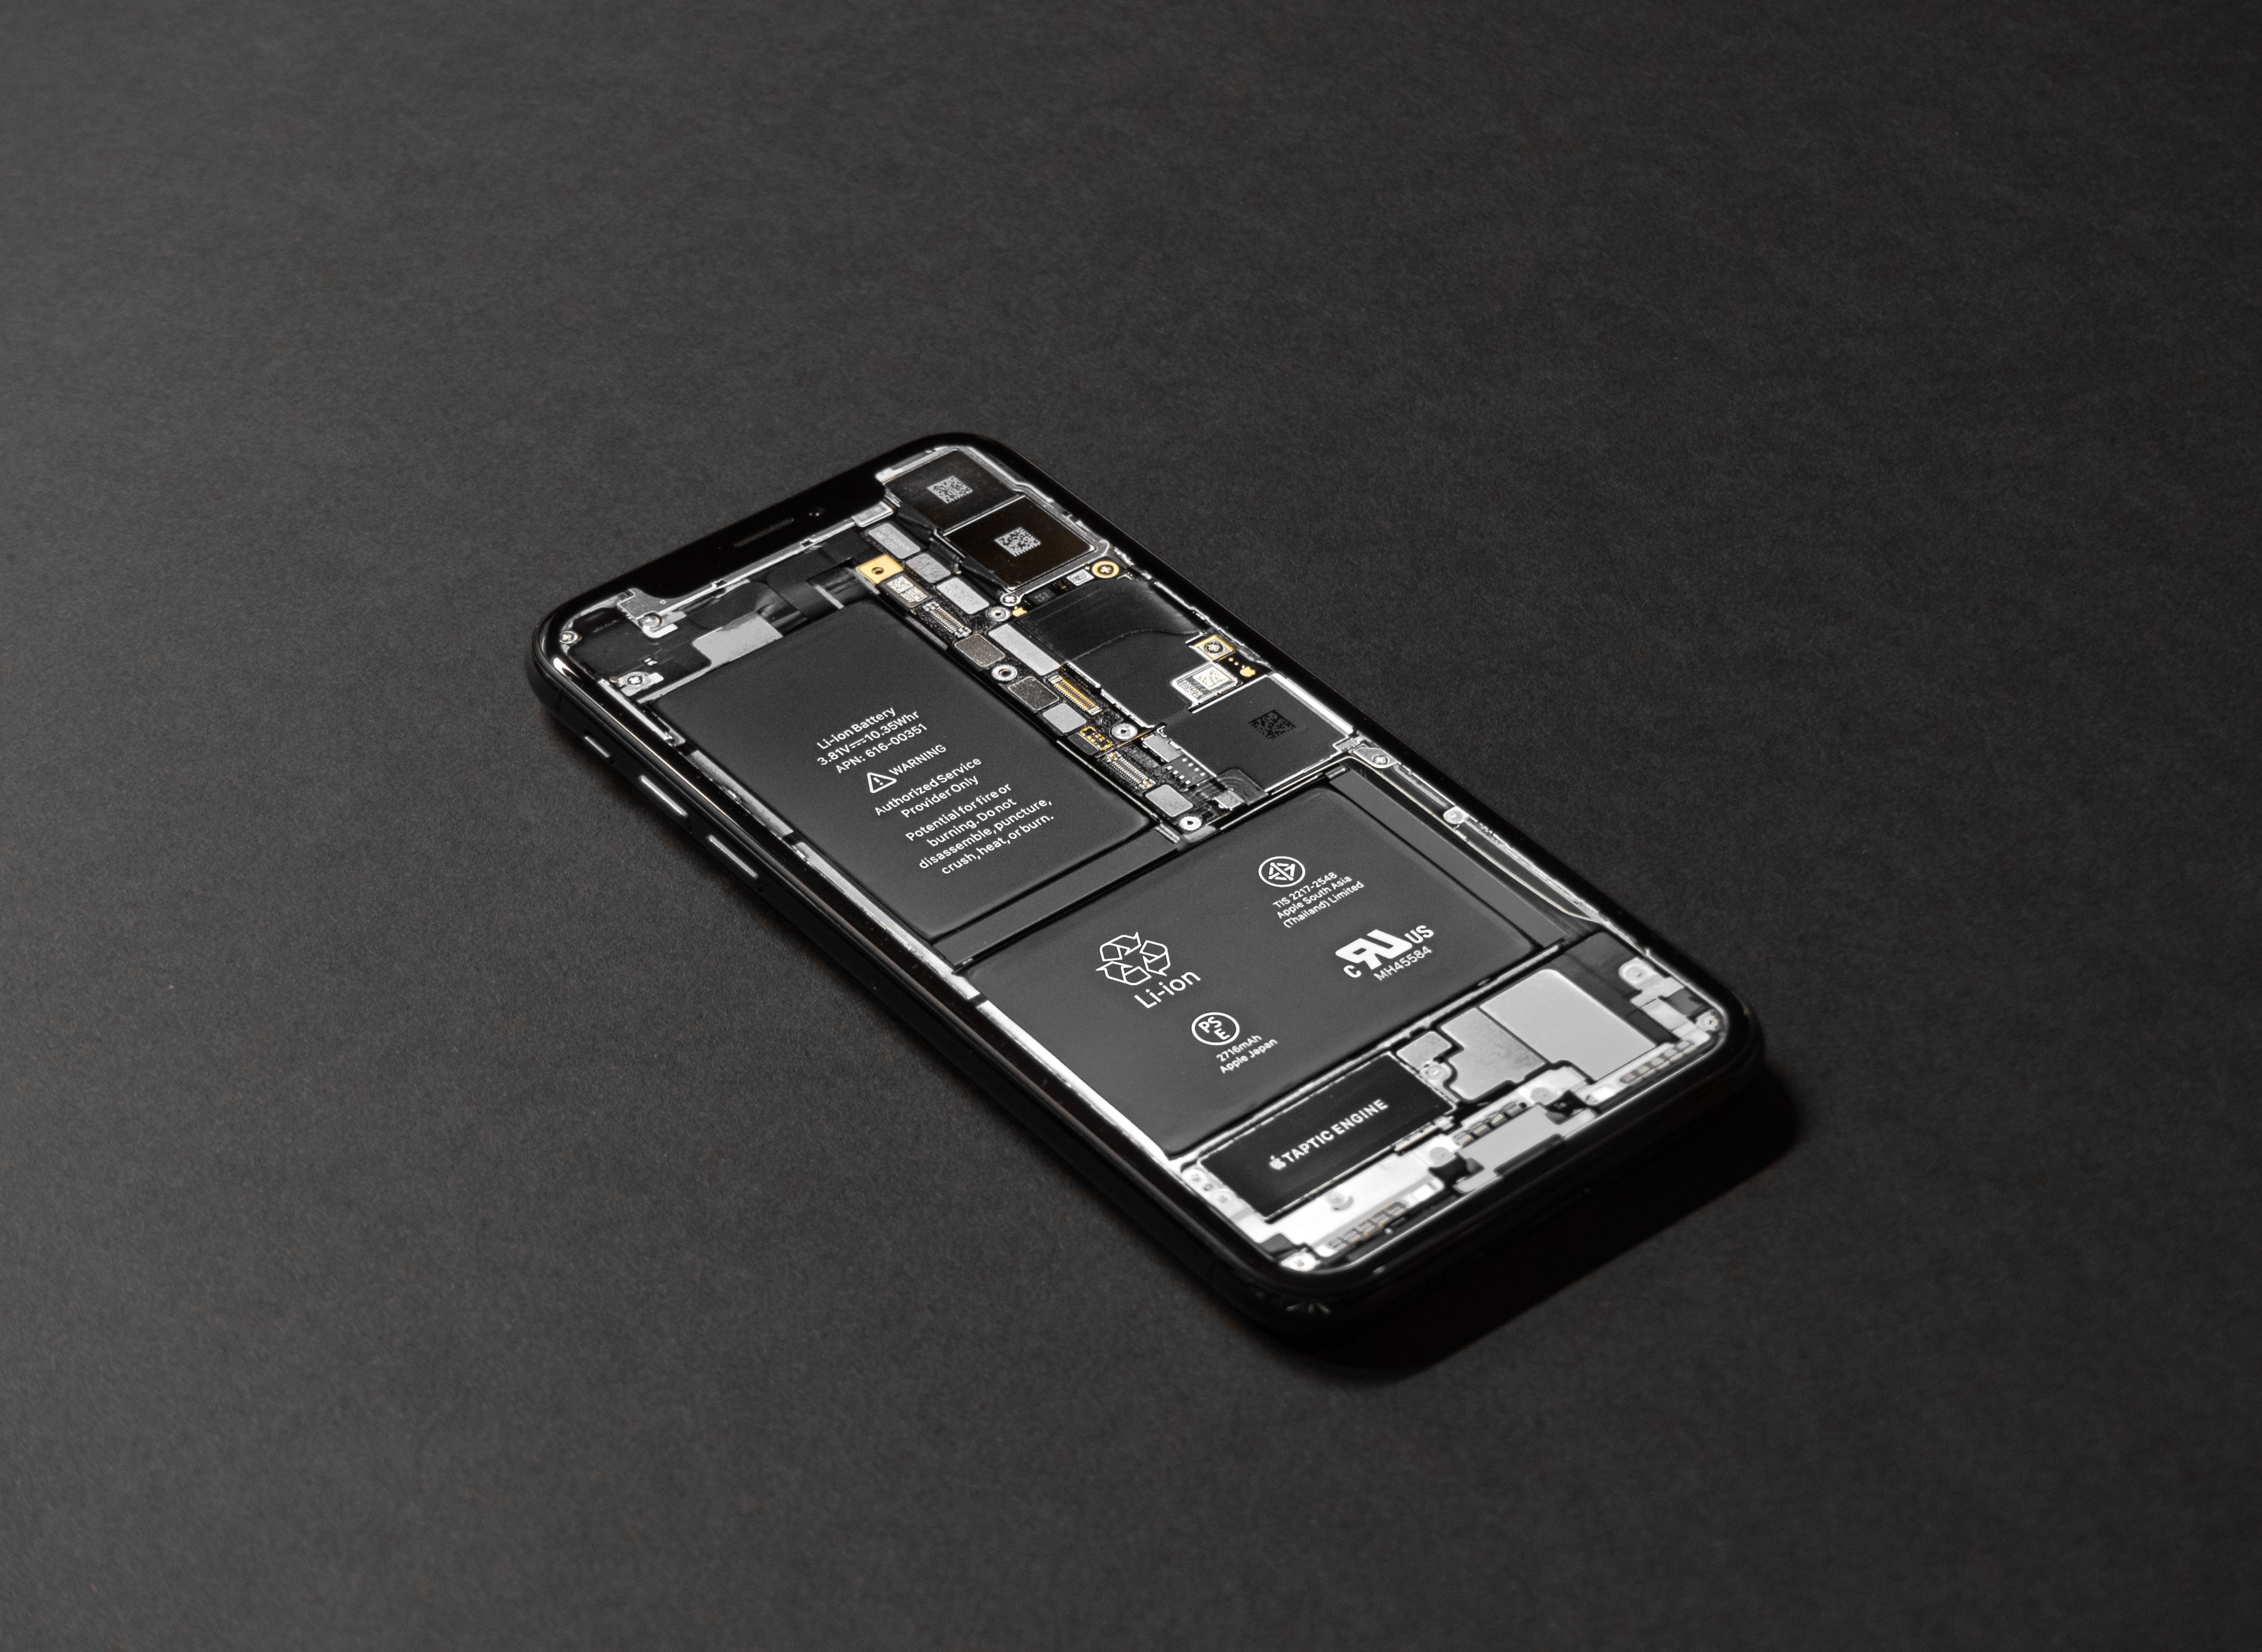 iPhone with exposed components (battery)